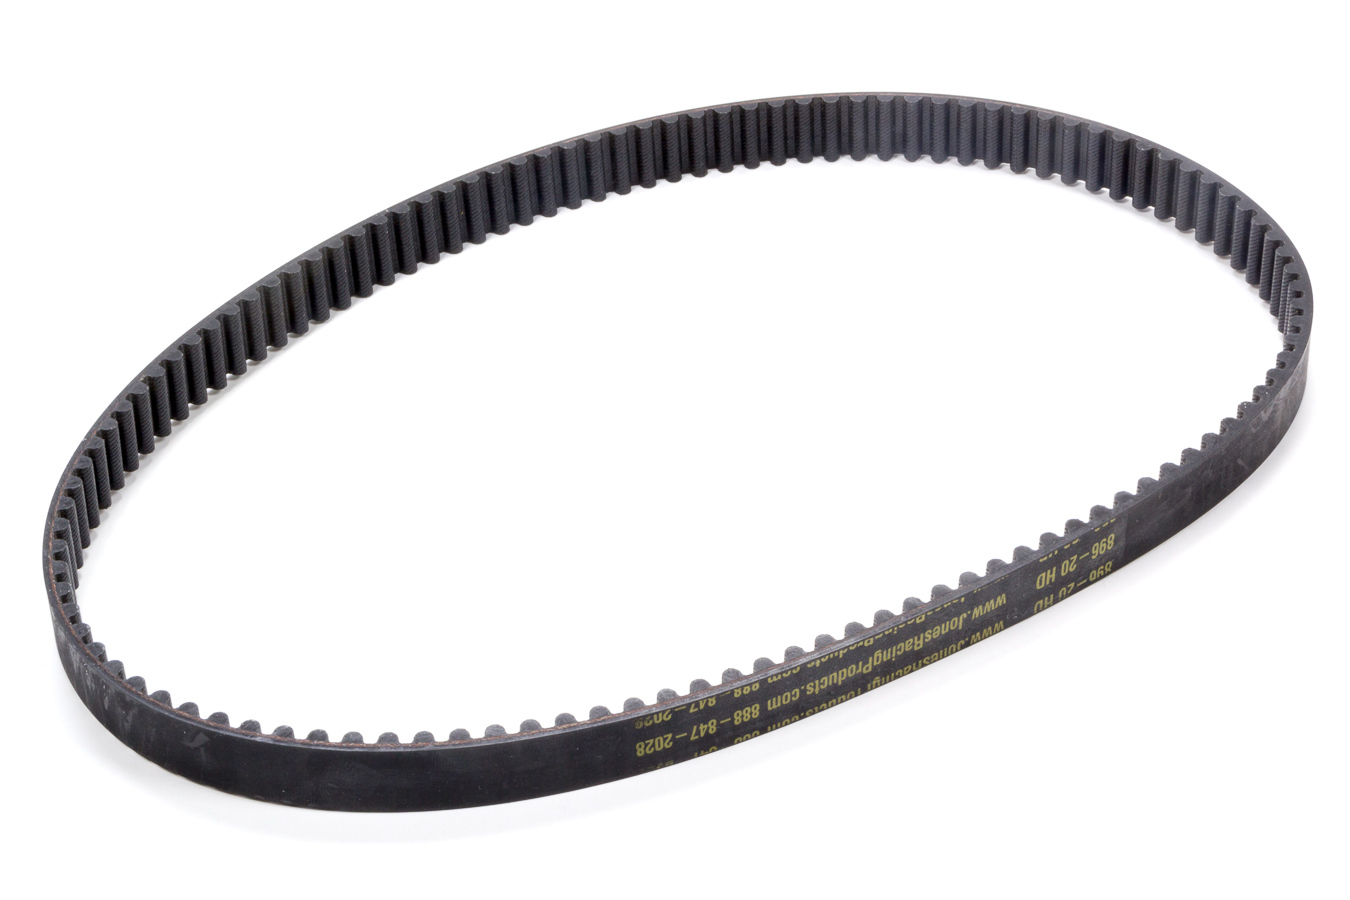 Jones Racing Products 896-20HD HTD Drive Belt, 35.280 in Long, 20 mm Wide, 8 mm Pitch, Each